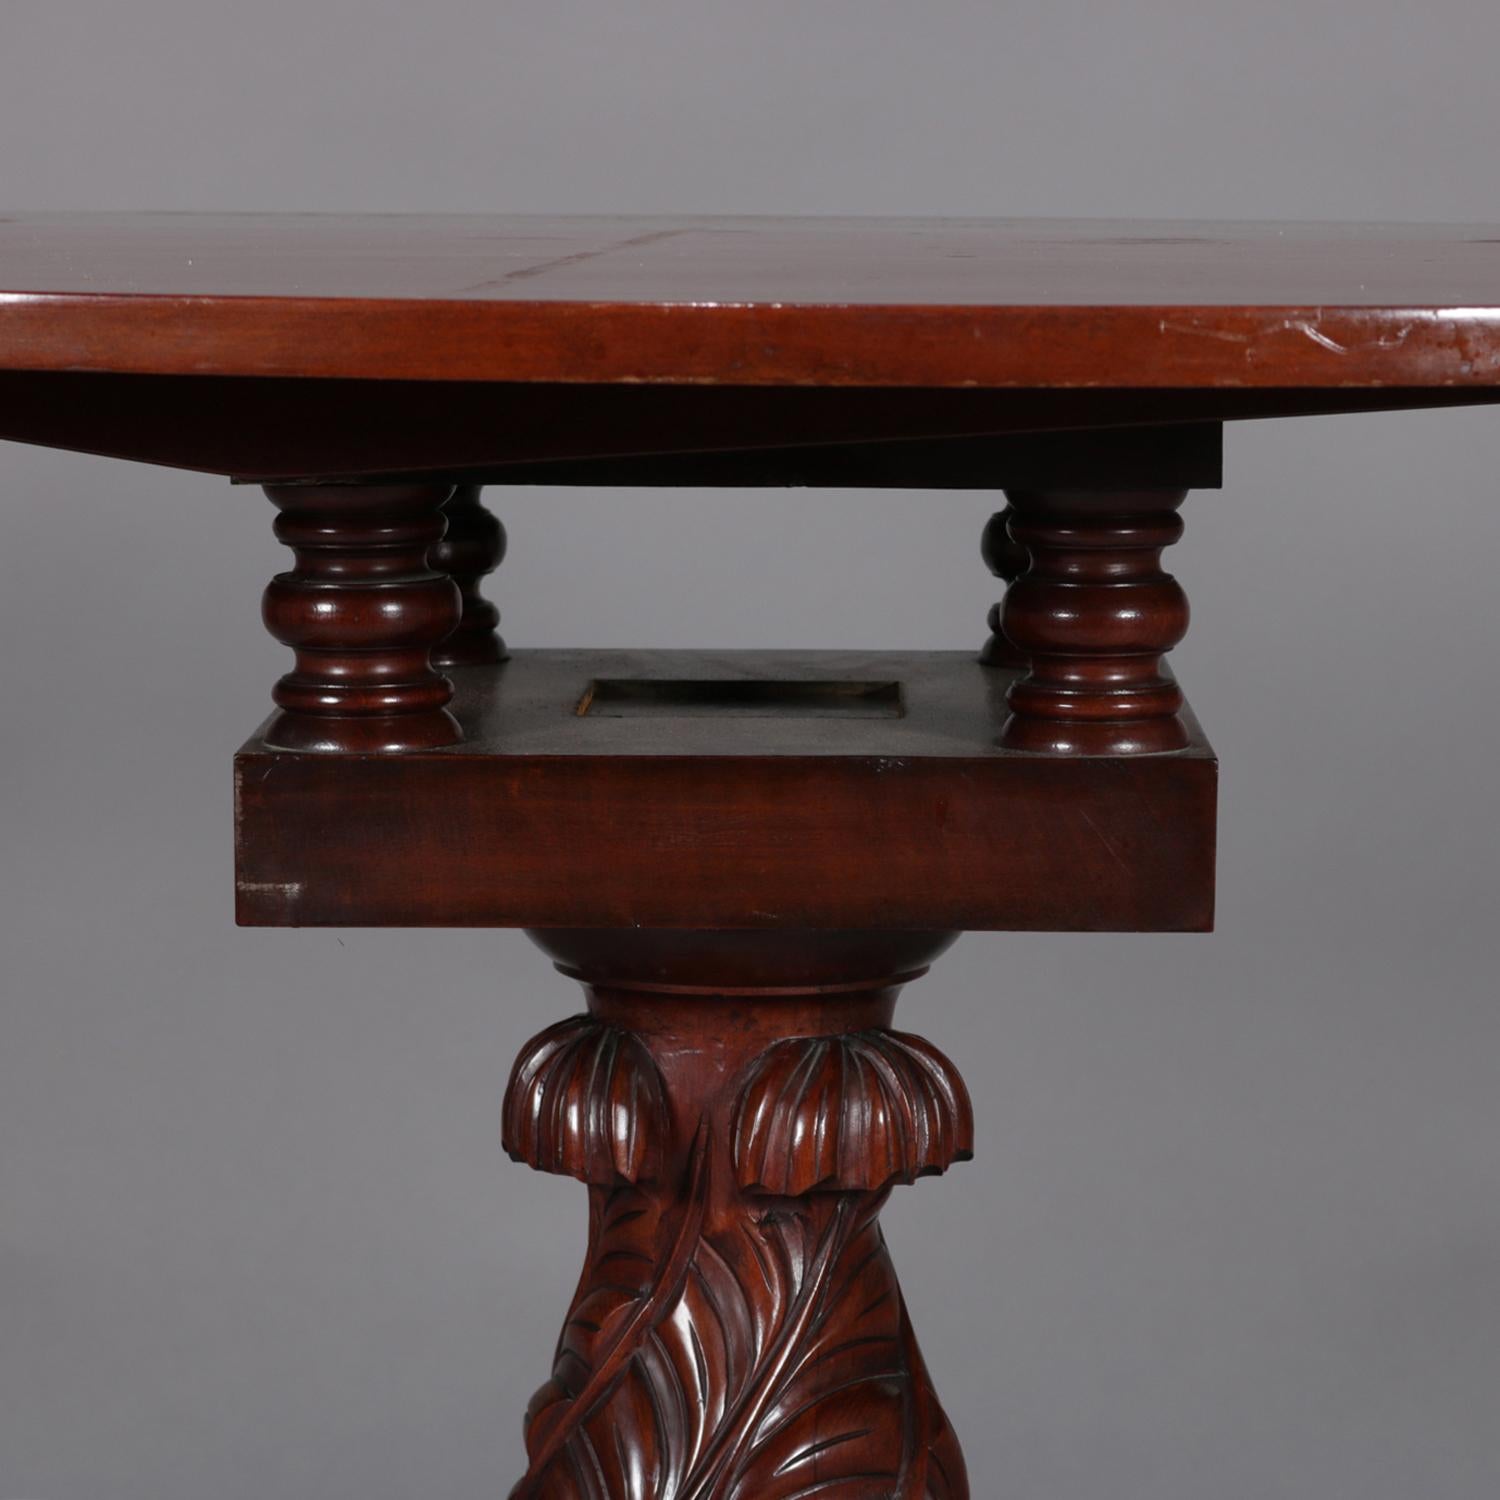 Antique American Empire Carved Mahogany Oval Tilt-Top Table Acanthus & Claw 1840 4